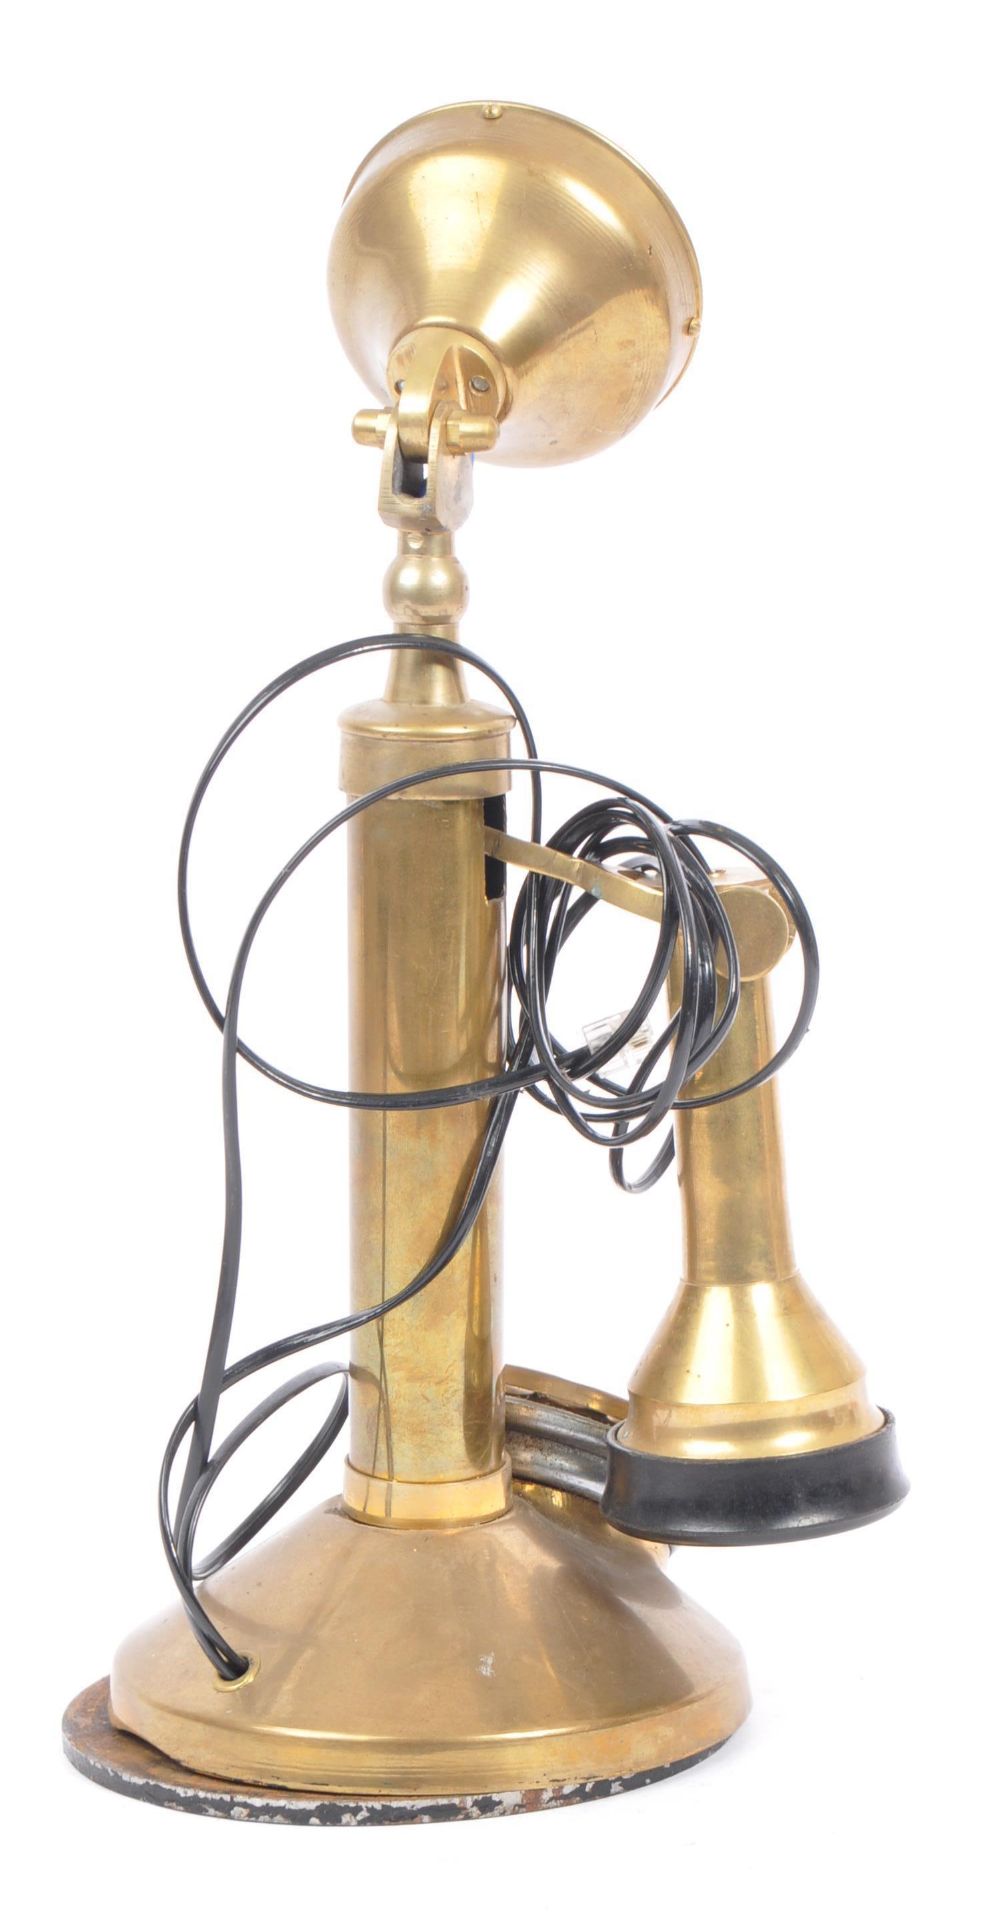 EARLY 20TH CENTURY BRASS CANDLESTICK TELEPHONE - Image 3 of 7